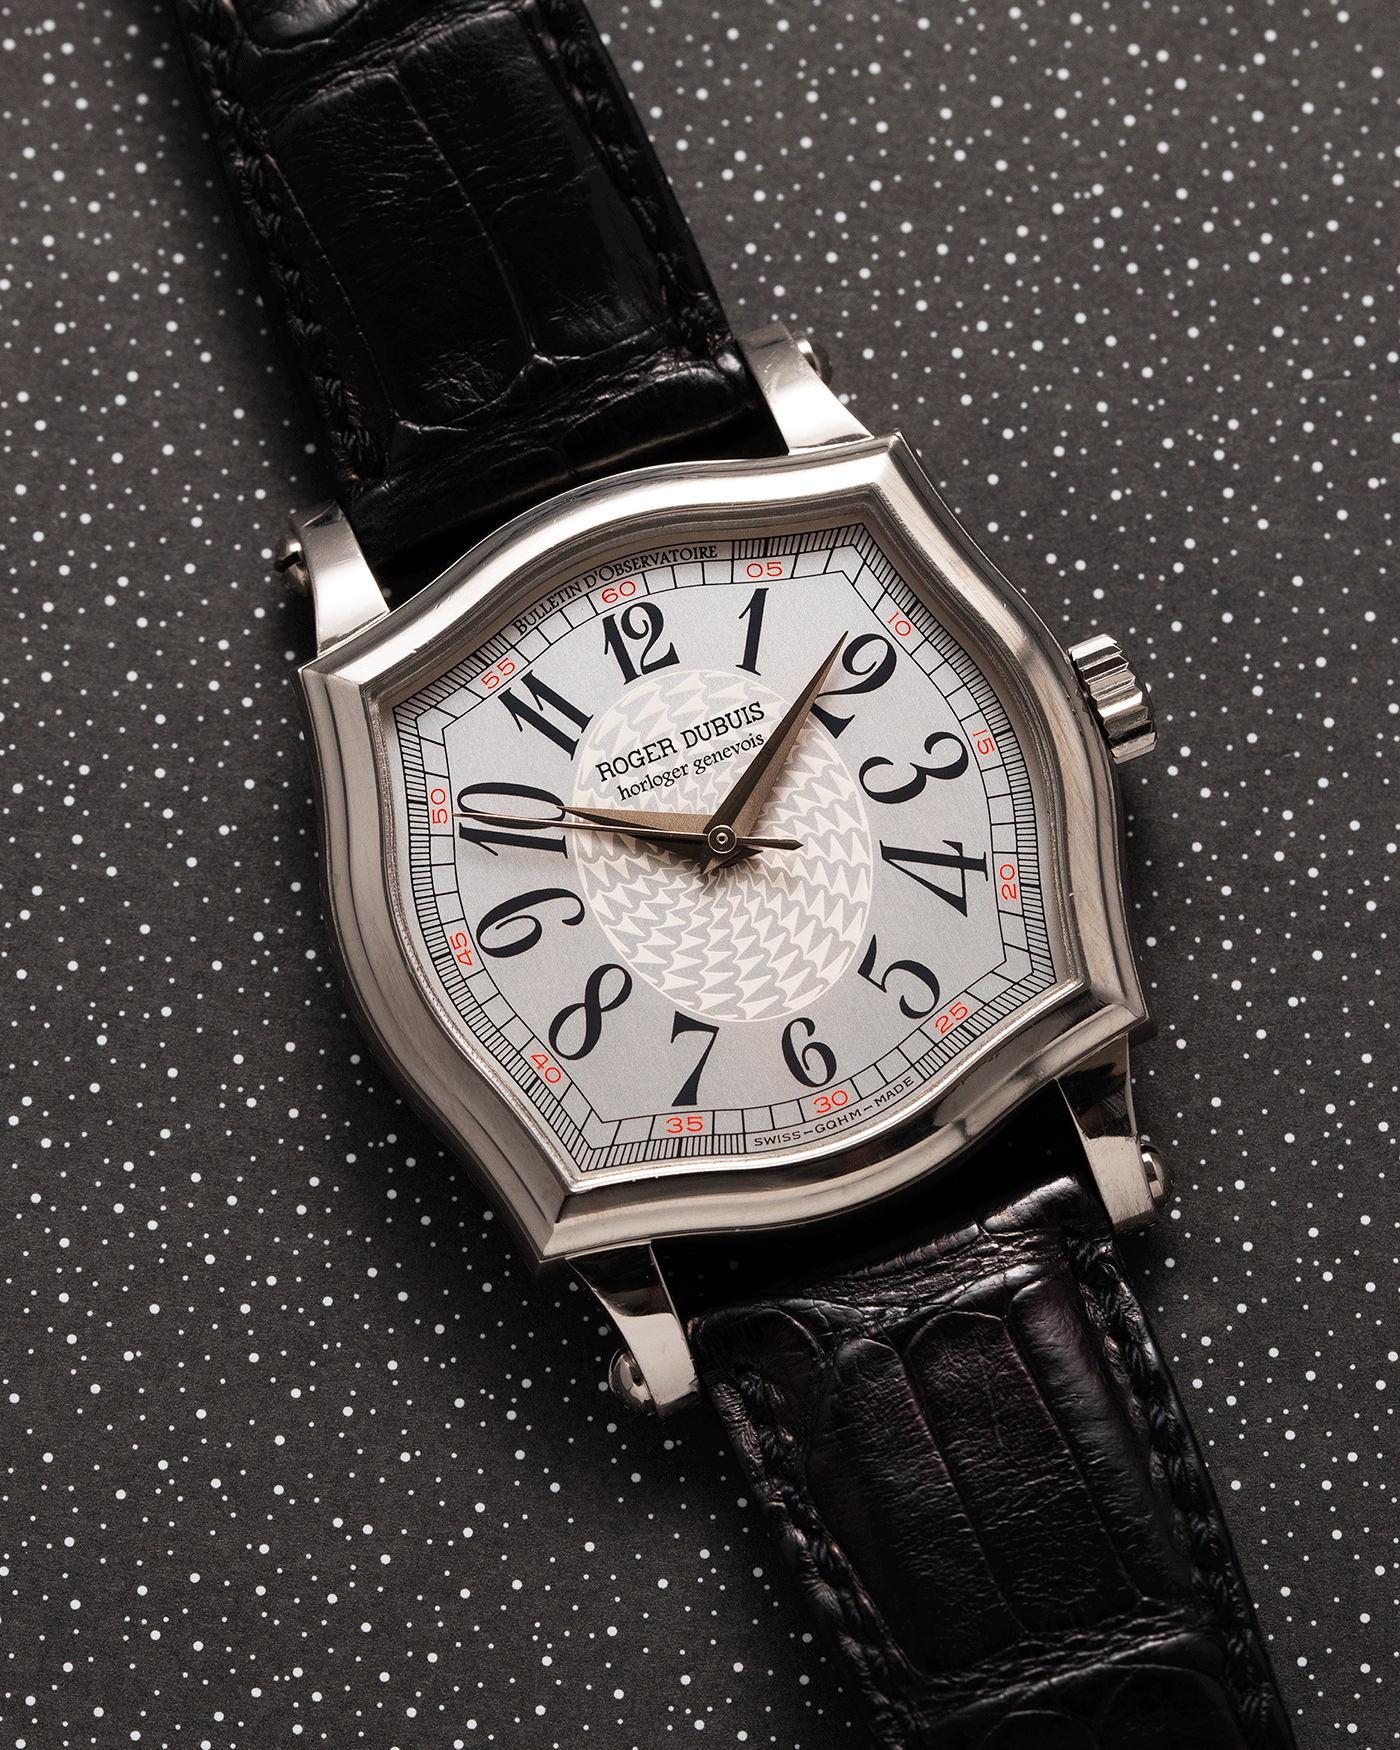 Brand: Roger Dubuis Year: 1990s Model: Sympathie 37 Material: 18k White Gold Movement: Cal RD 57 Case Diameter: 37mm Strap: Roger Dubuis Black Alligator with 18k White Gold Tang Buckle